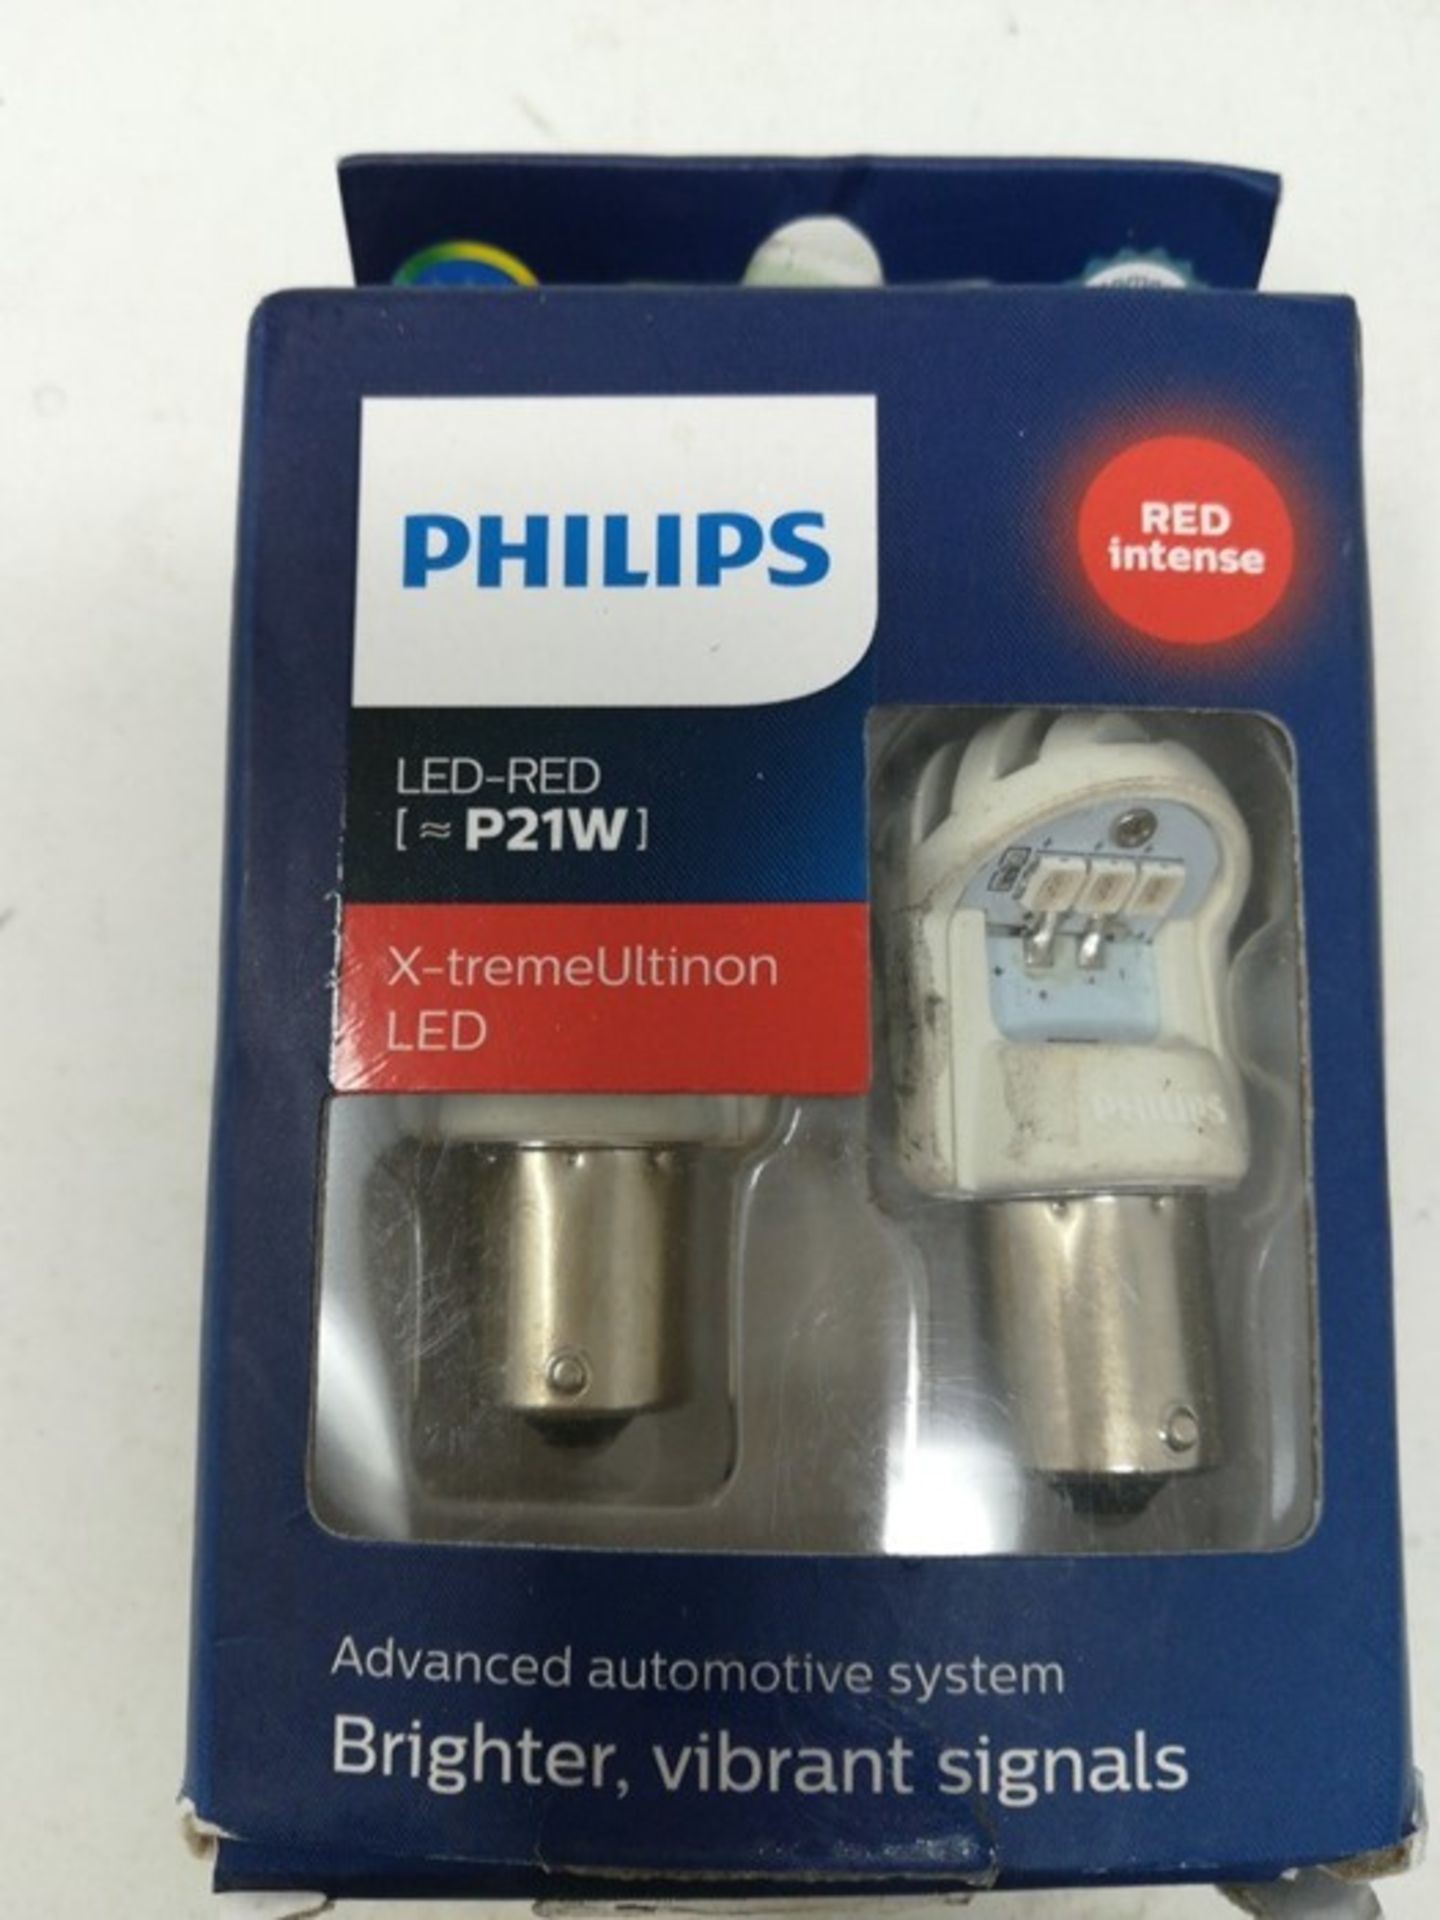 Philips 11498XURX2 LED car signaling Bulb (P21W red), Set of 2 - Image 2 of 2